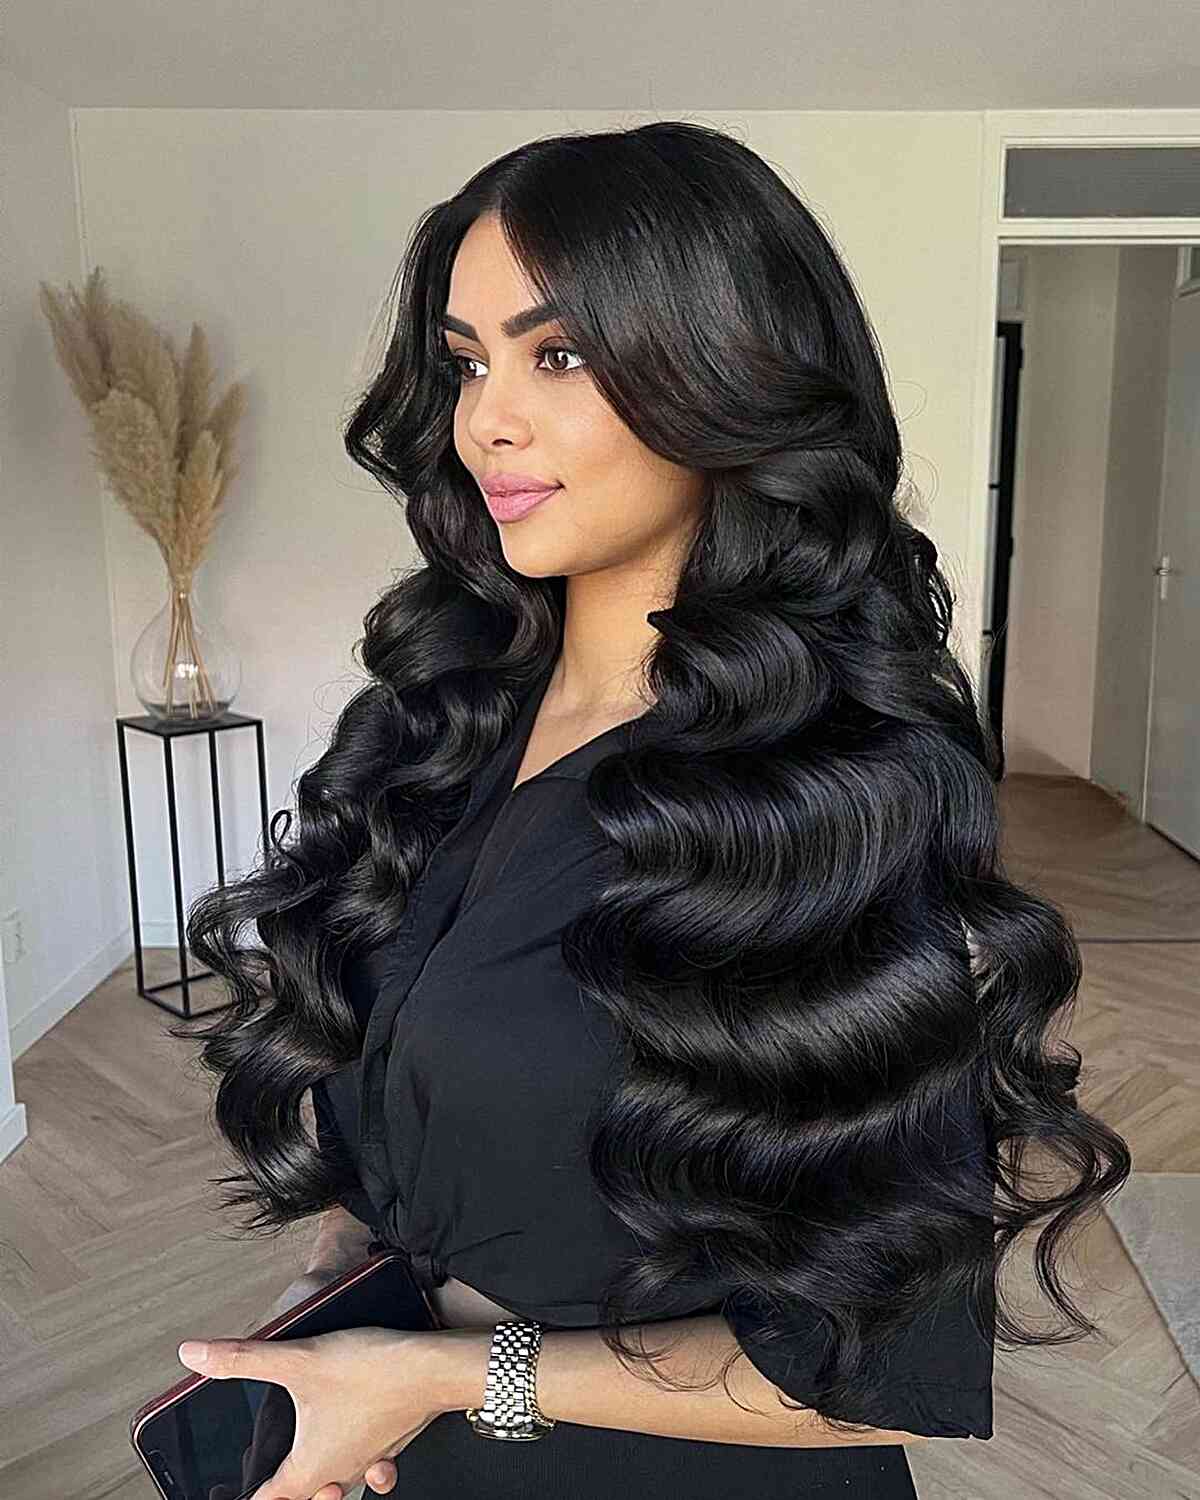 Center-Parted Luscious Black Hollywood Waves for Very Long Hair